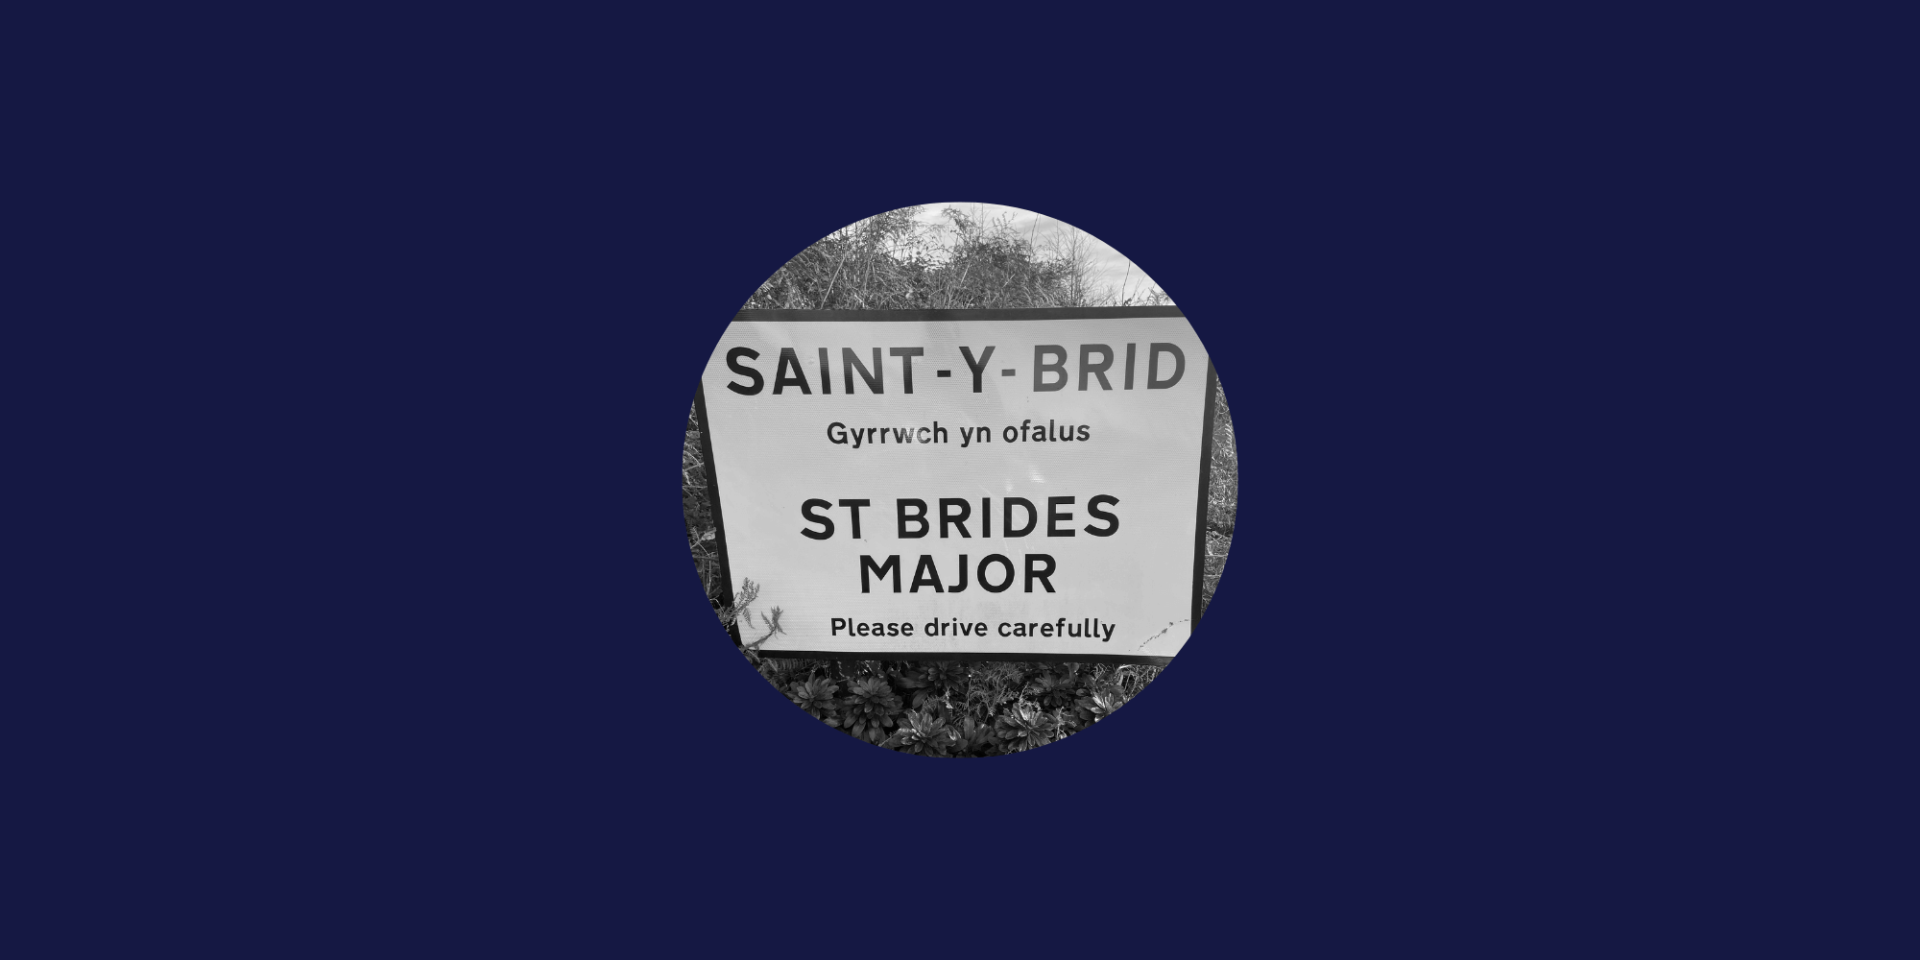 Area Guide for St Brides Major